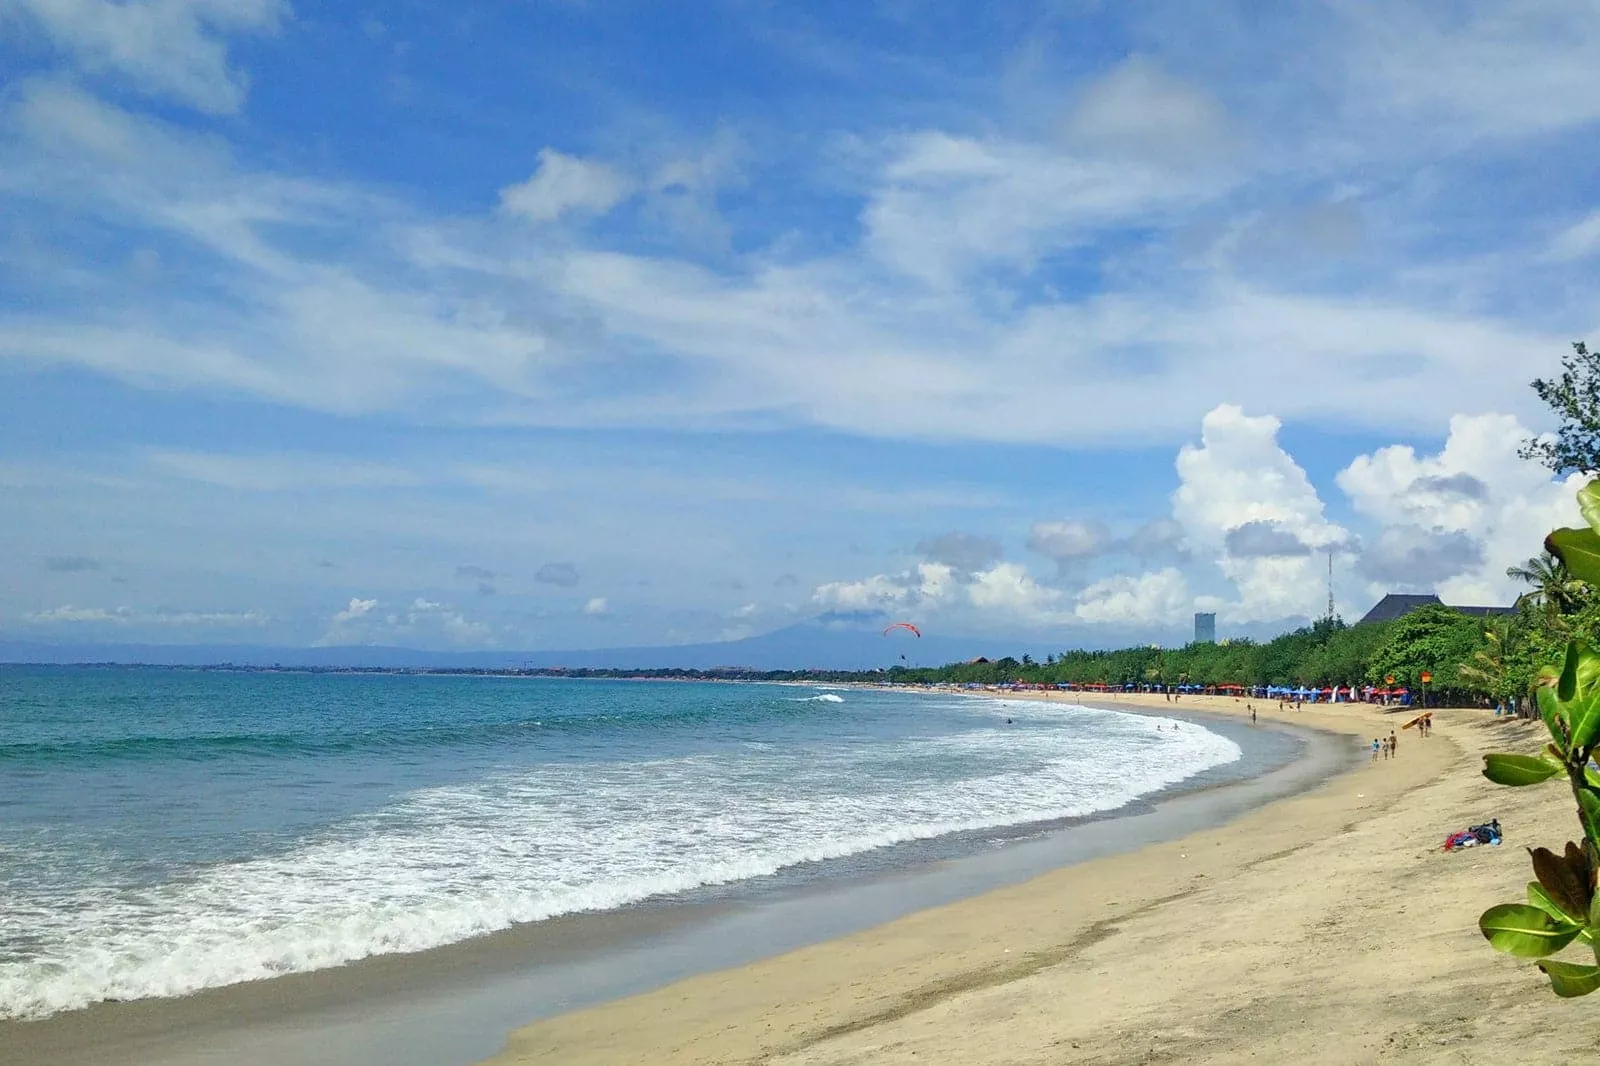 Kuta Beach in Indonesia, Central Asia | Surfing,Beaches - Rated 4.1